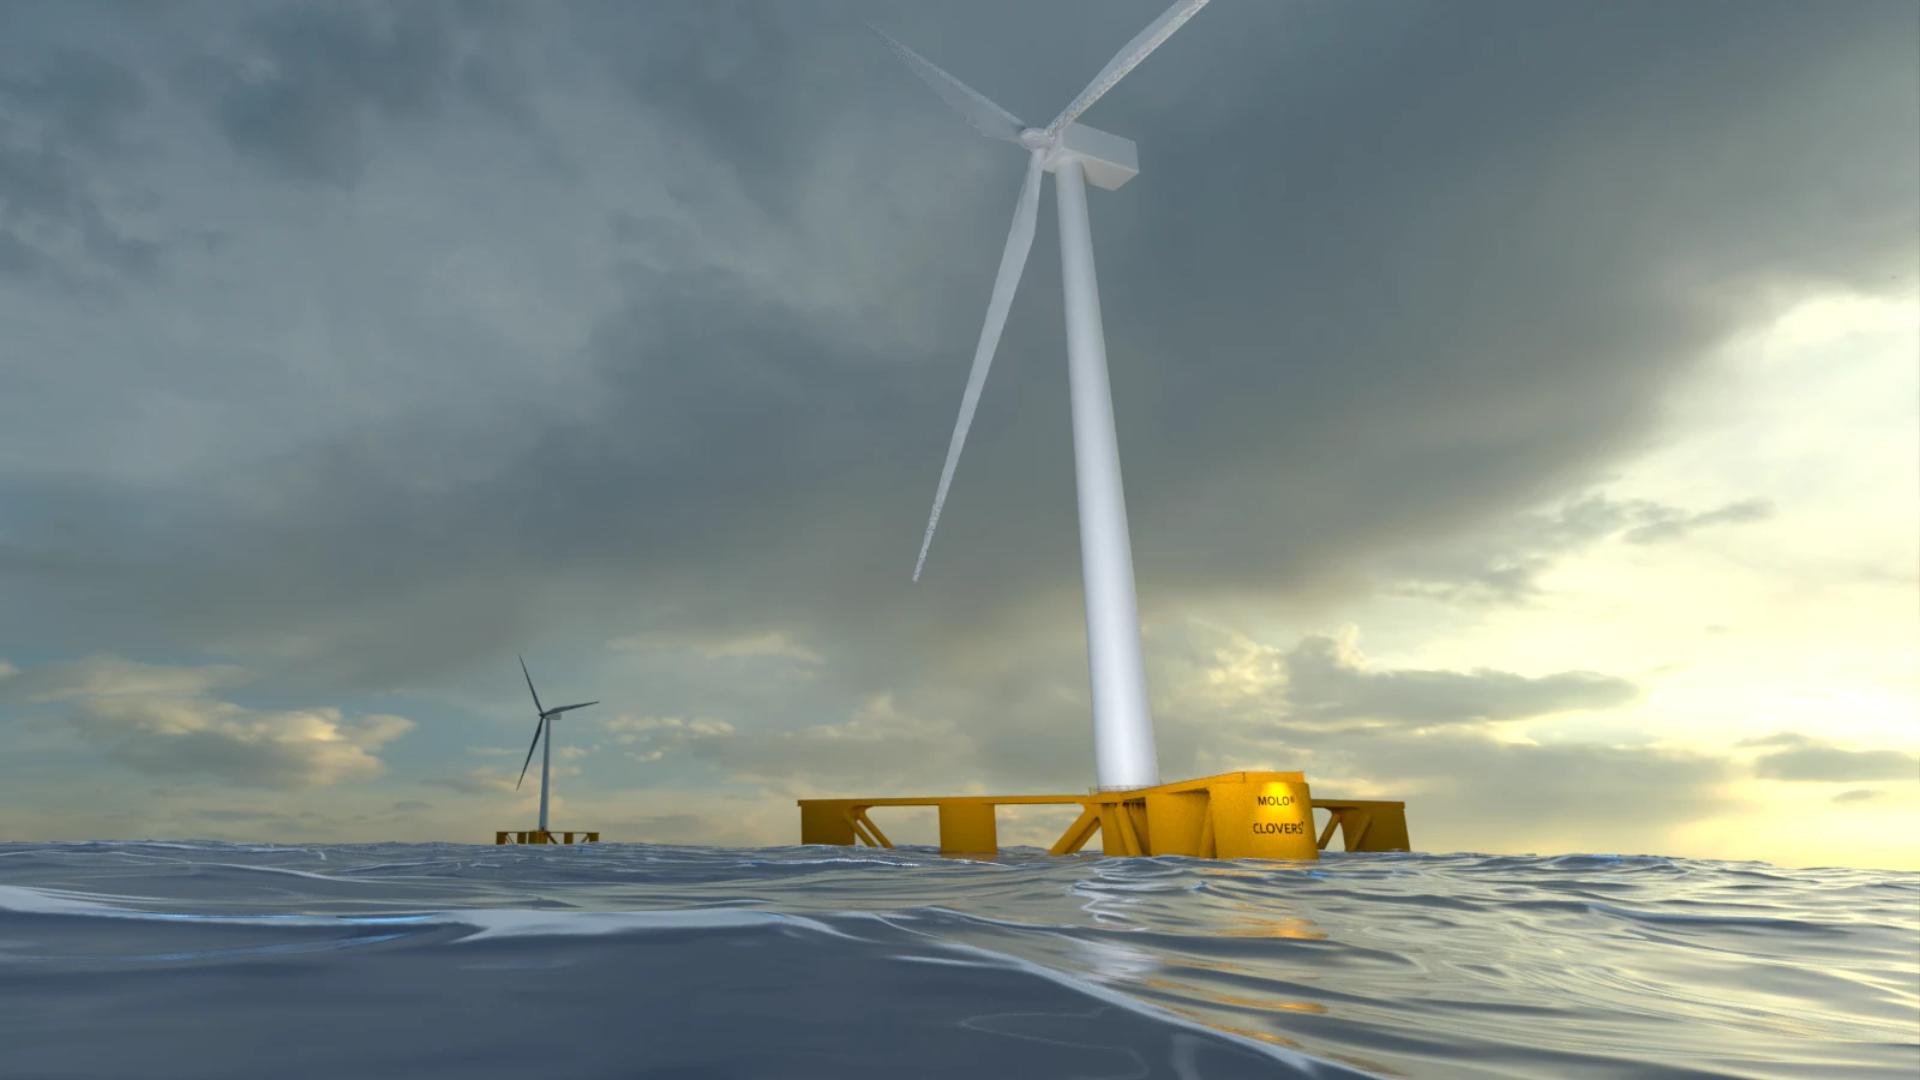 Two offshore wind turbines with yellow floating platforms